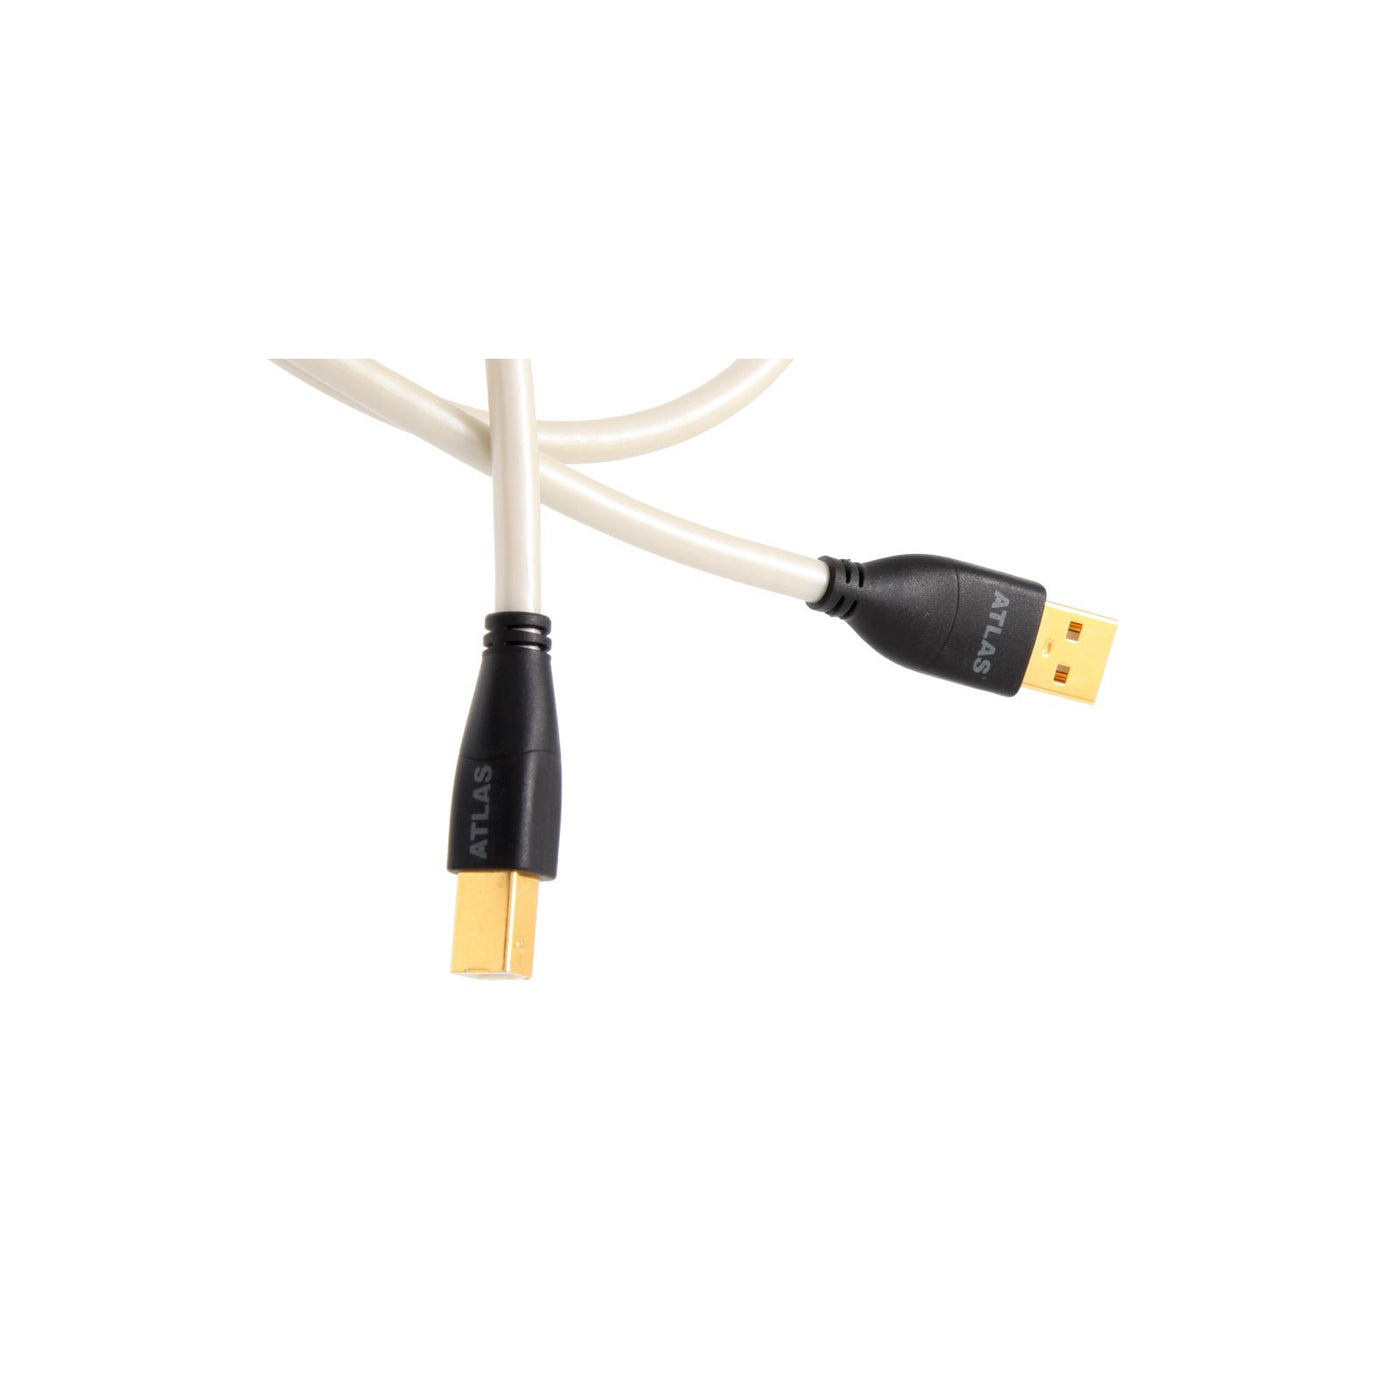 Atlas Element SC USB Type A to Type B Cable at Audio Influence